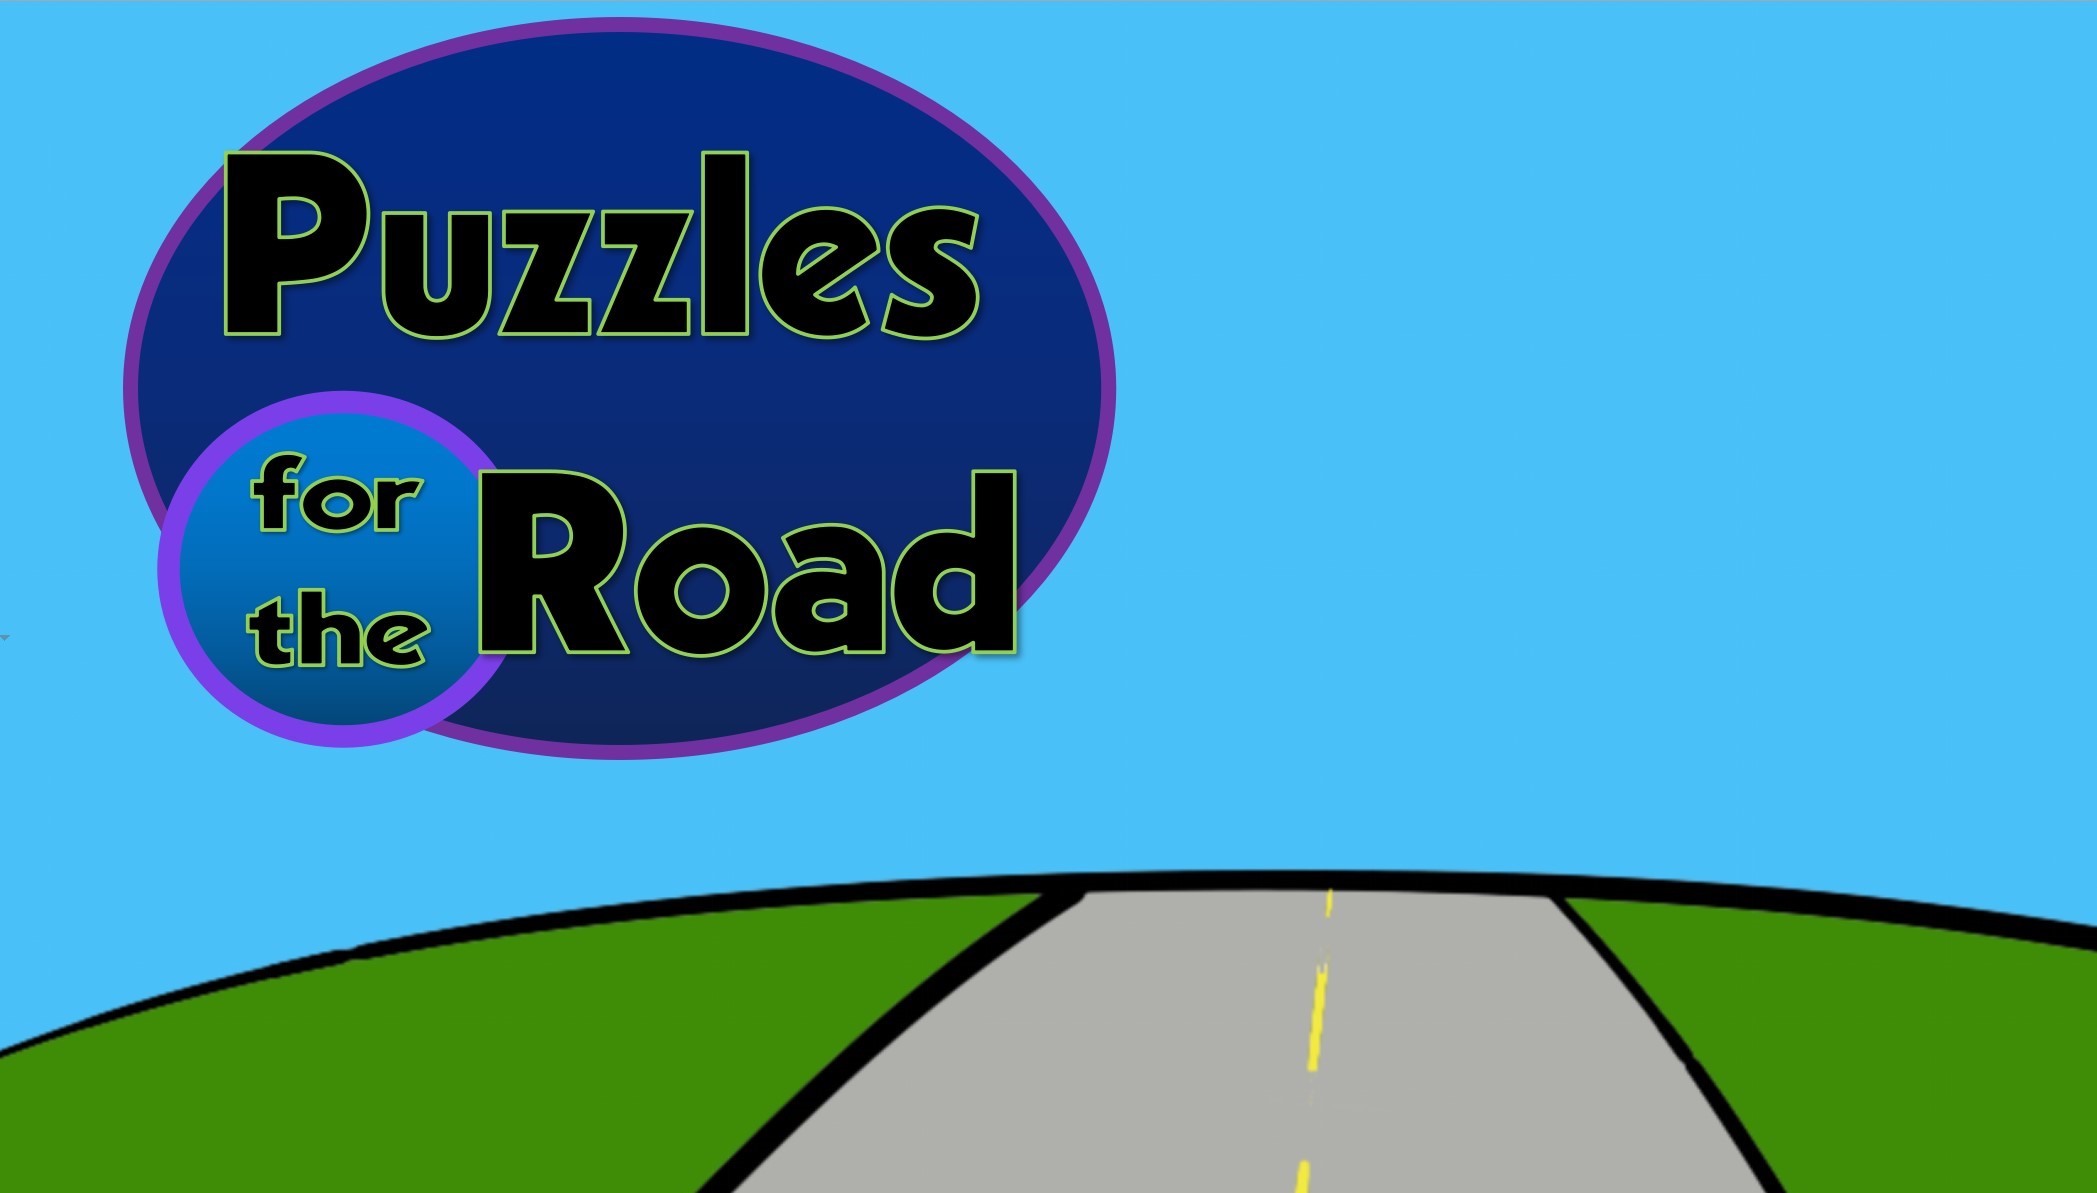 Puzzles for the Road